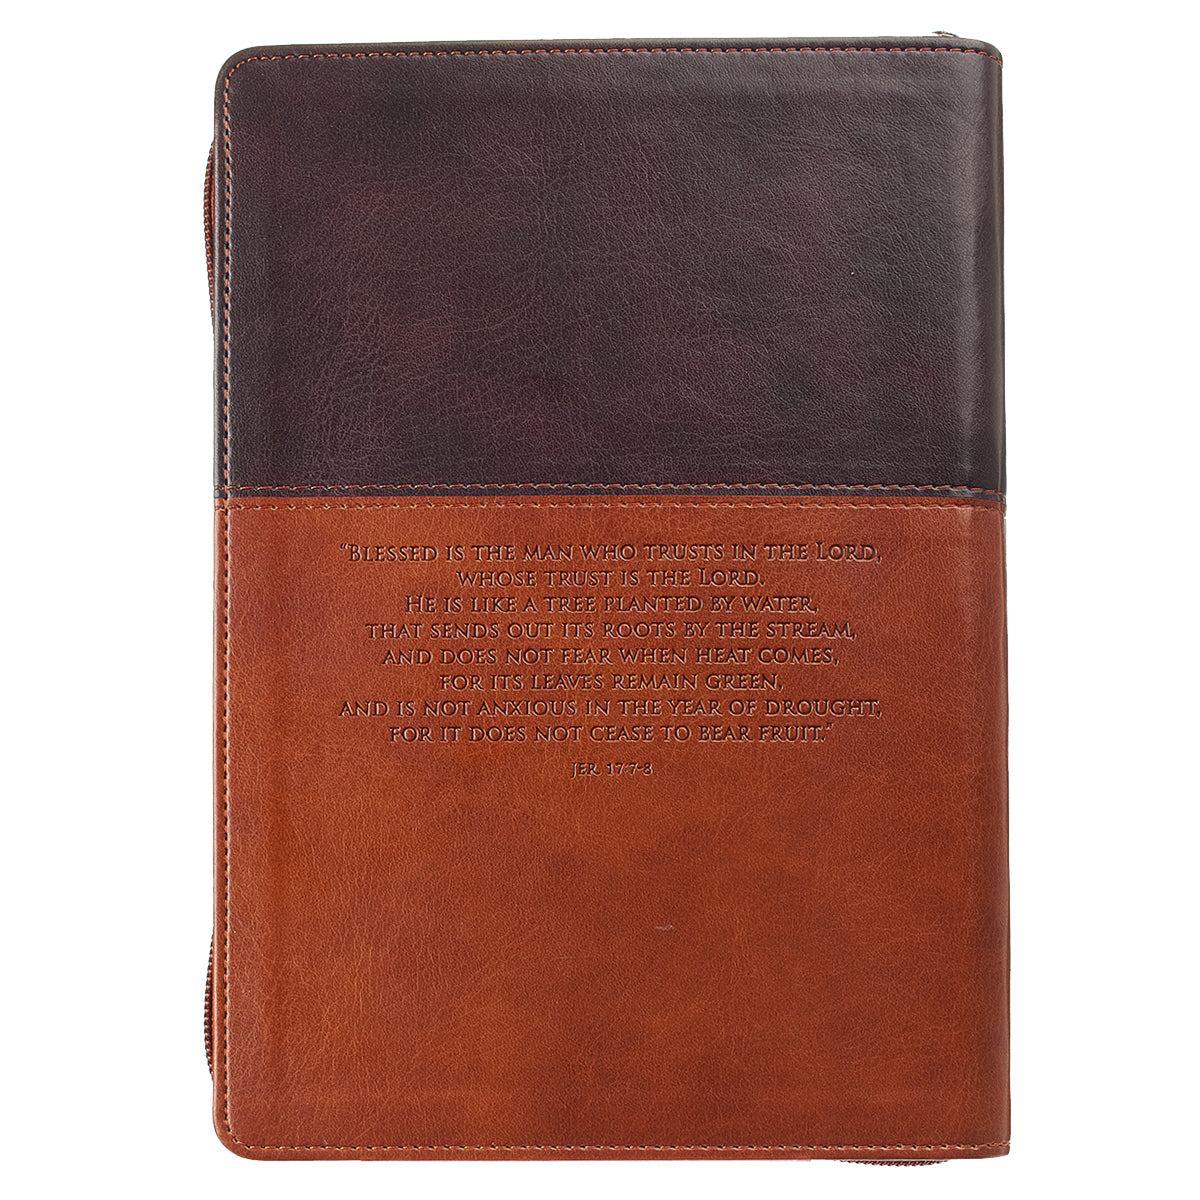 Image of Journal-Classic LuxLeather-Trust-Brown/Tan w/Zipper other